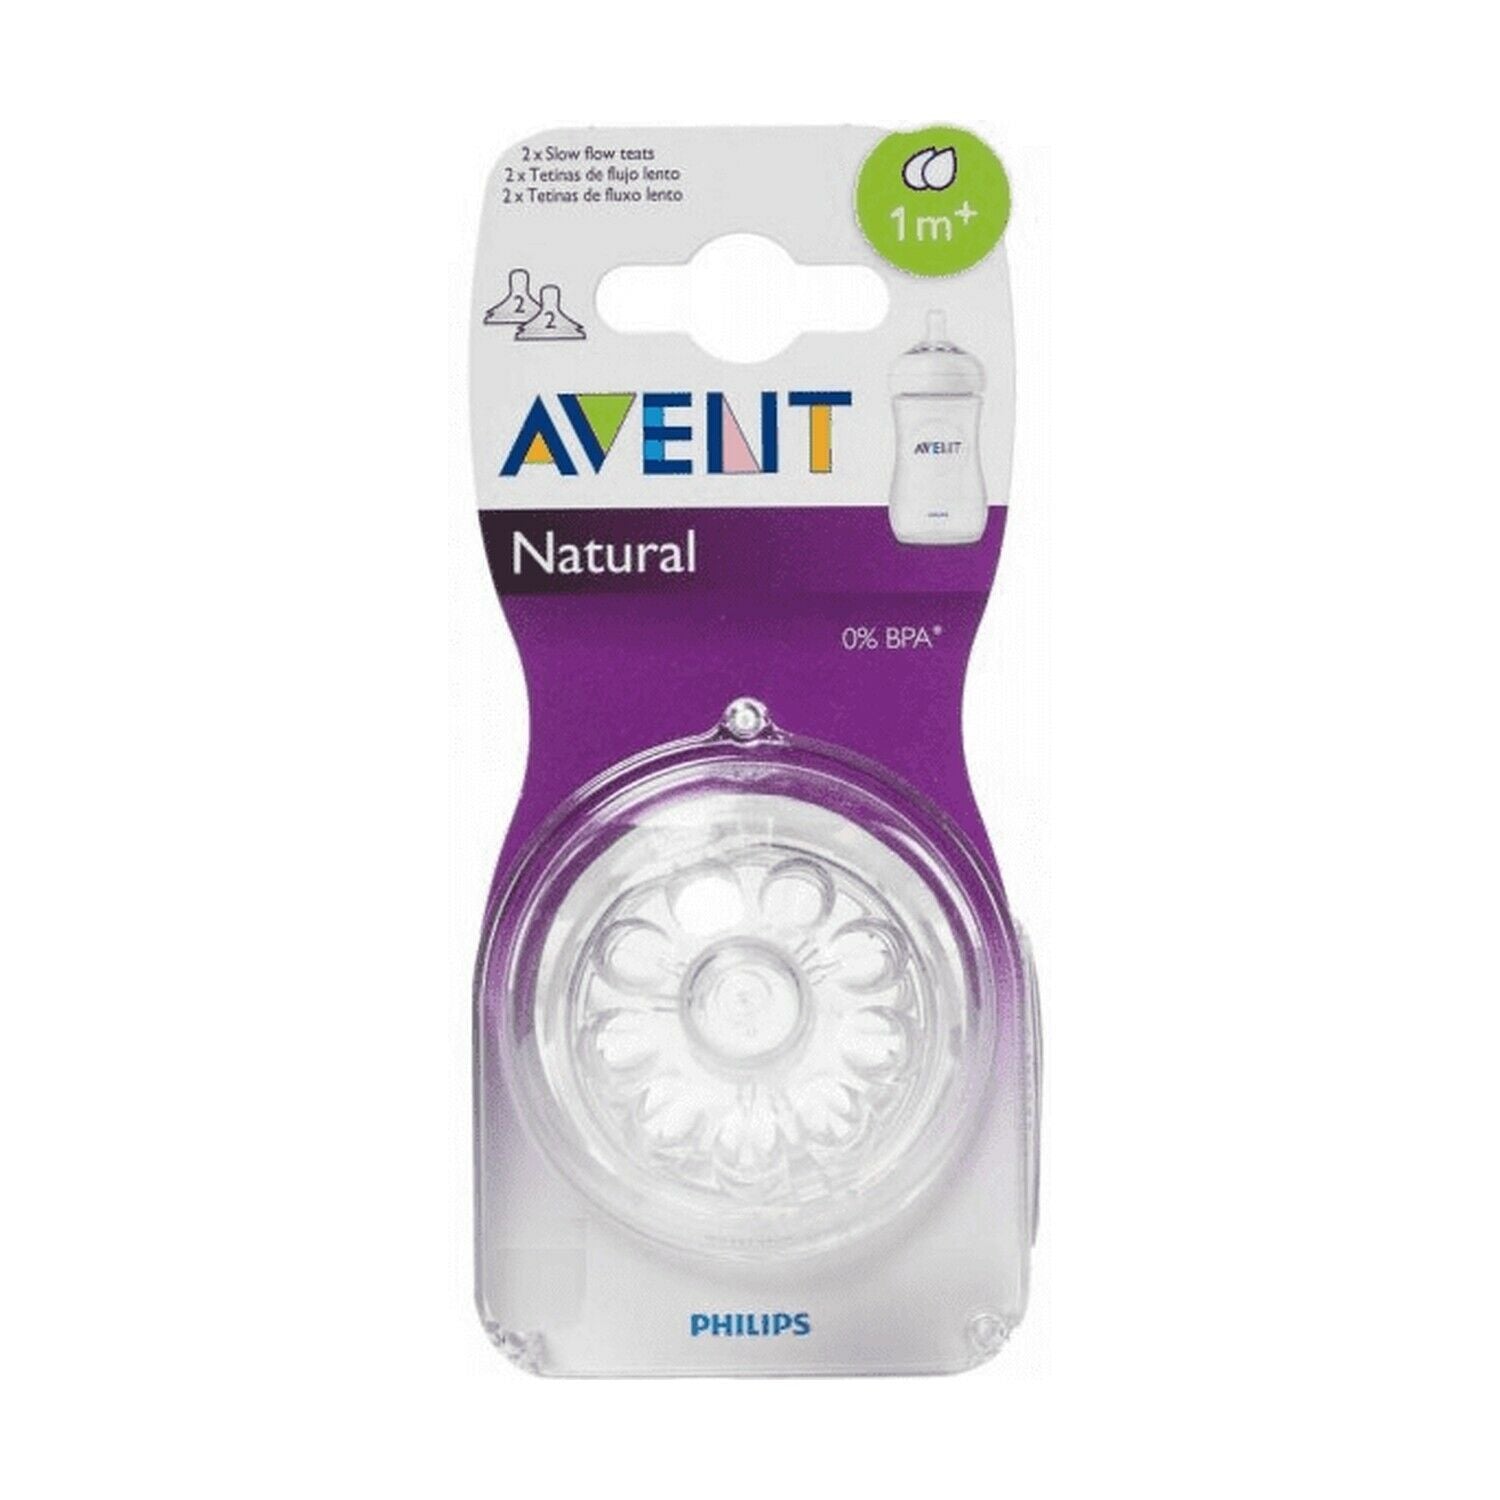 Philips Avent Extra Soft Silicone Teat 1m+ Natural teat 2-pack SCF042/27